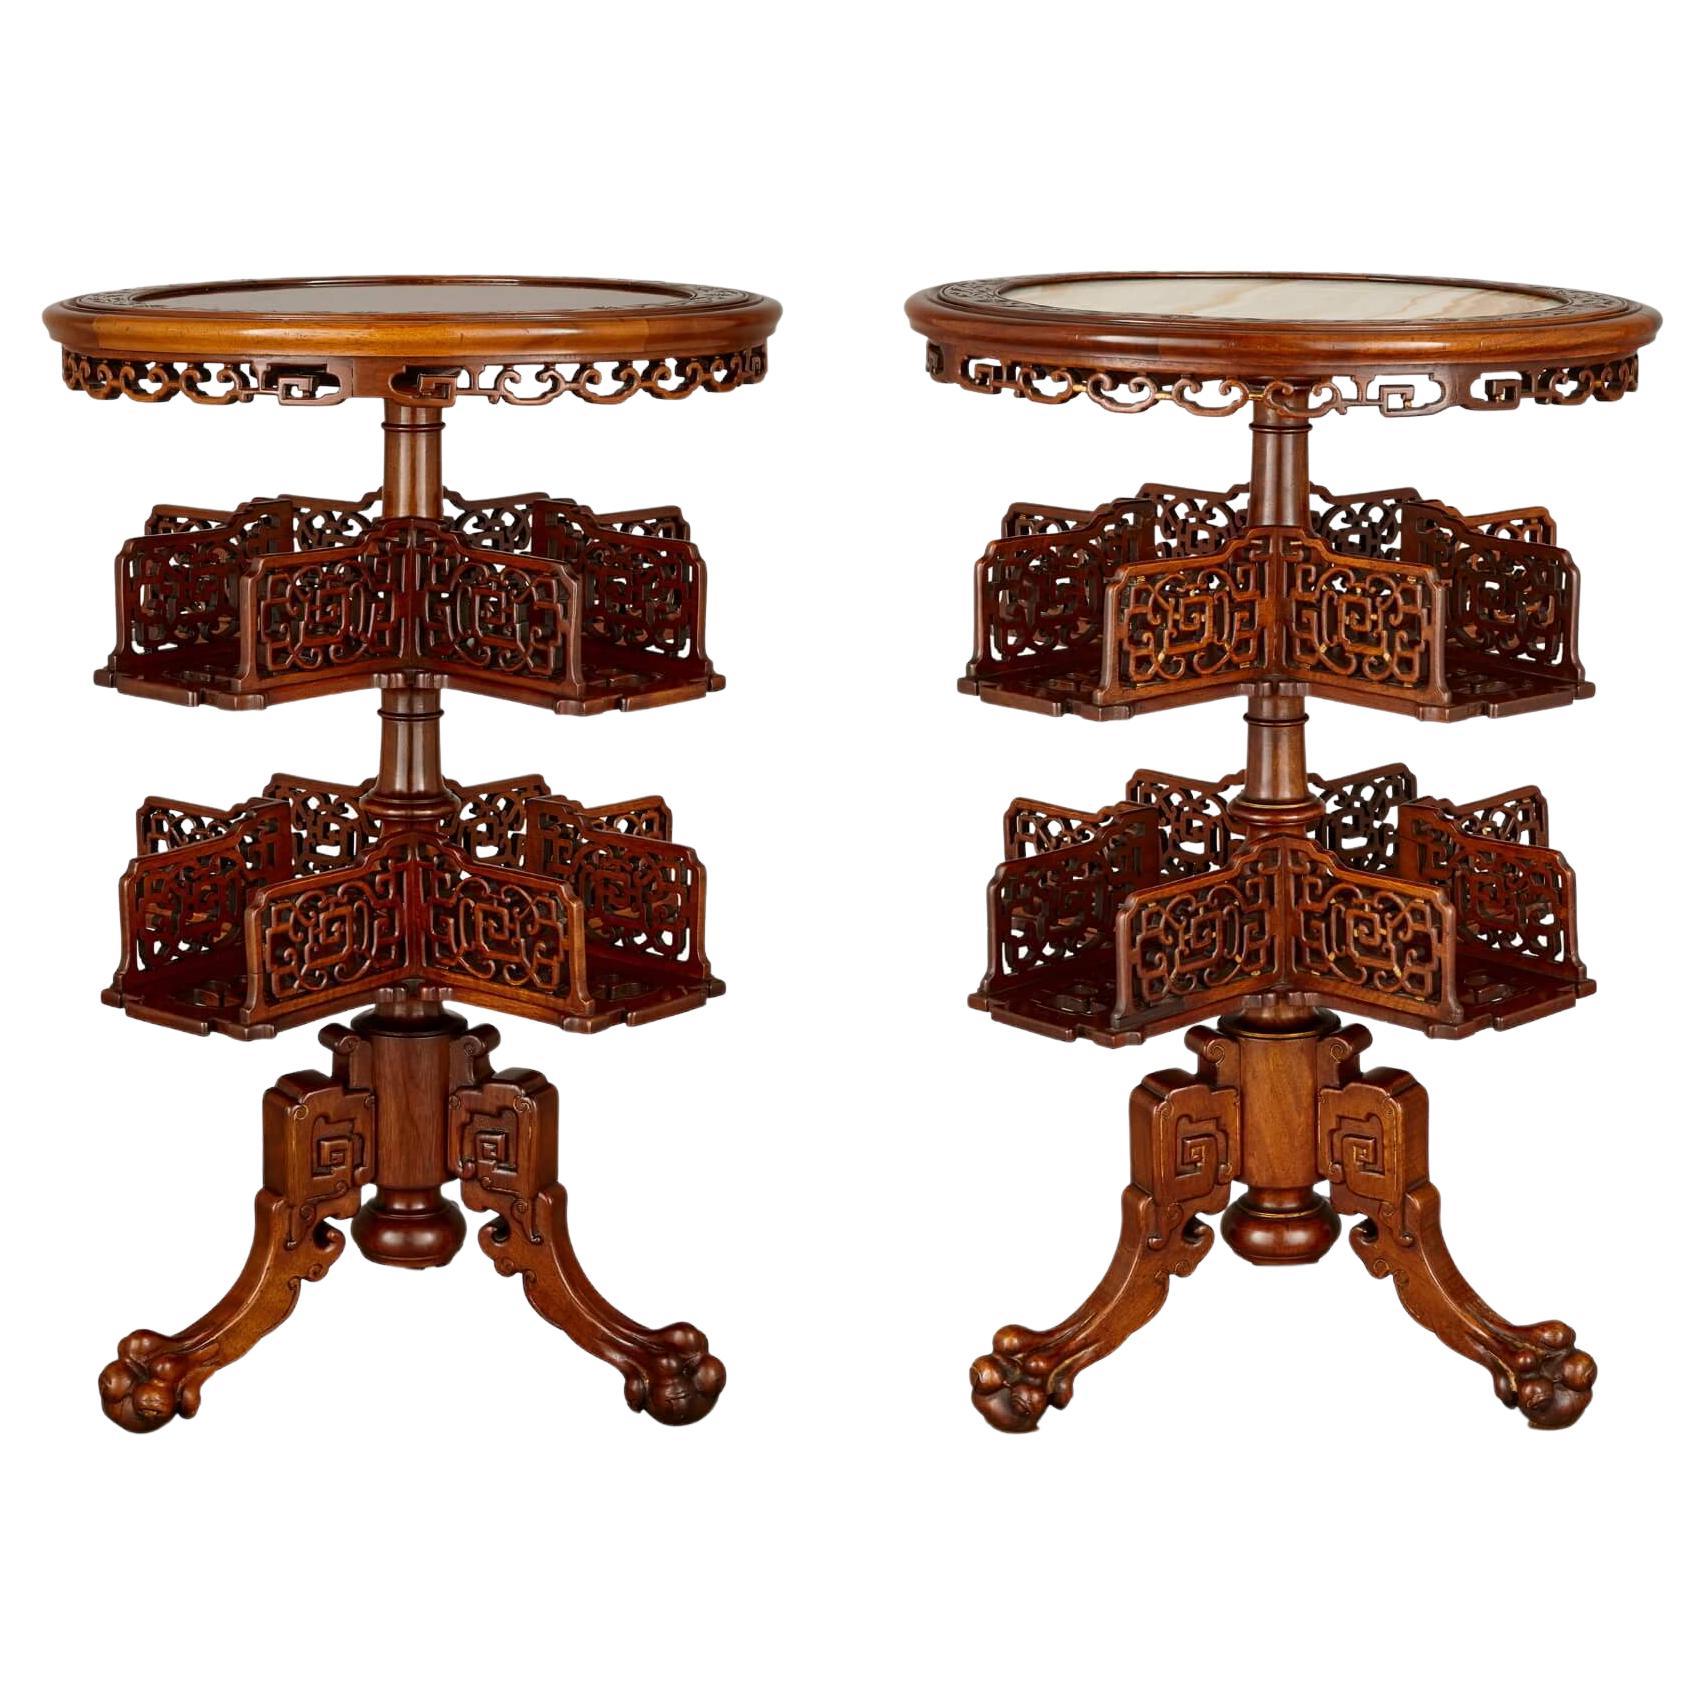 Two Round Inlaid Hardwood Chinese Tables For Sale